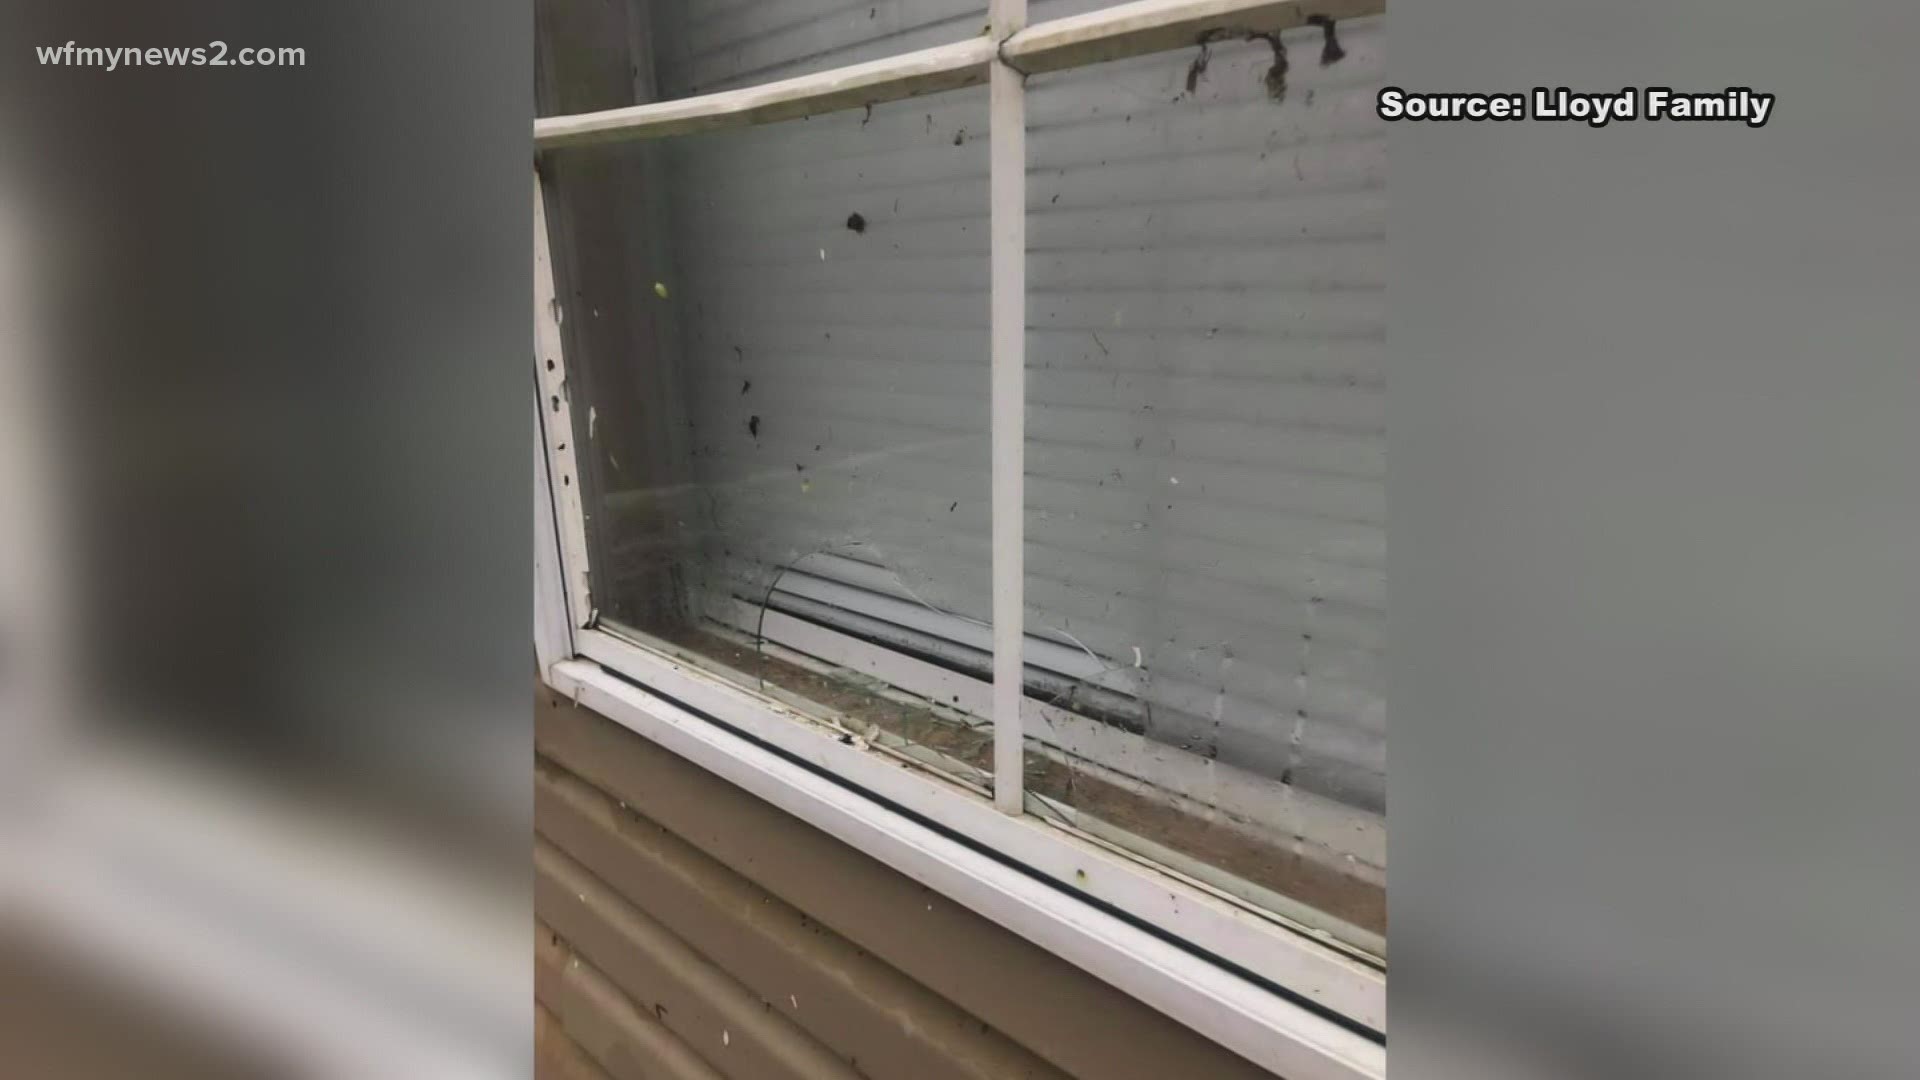 One family watched in shock as the hail shattered a window, dented their cars, and punctured holes in their home's exterior.